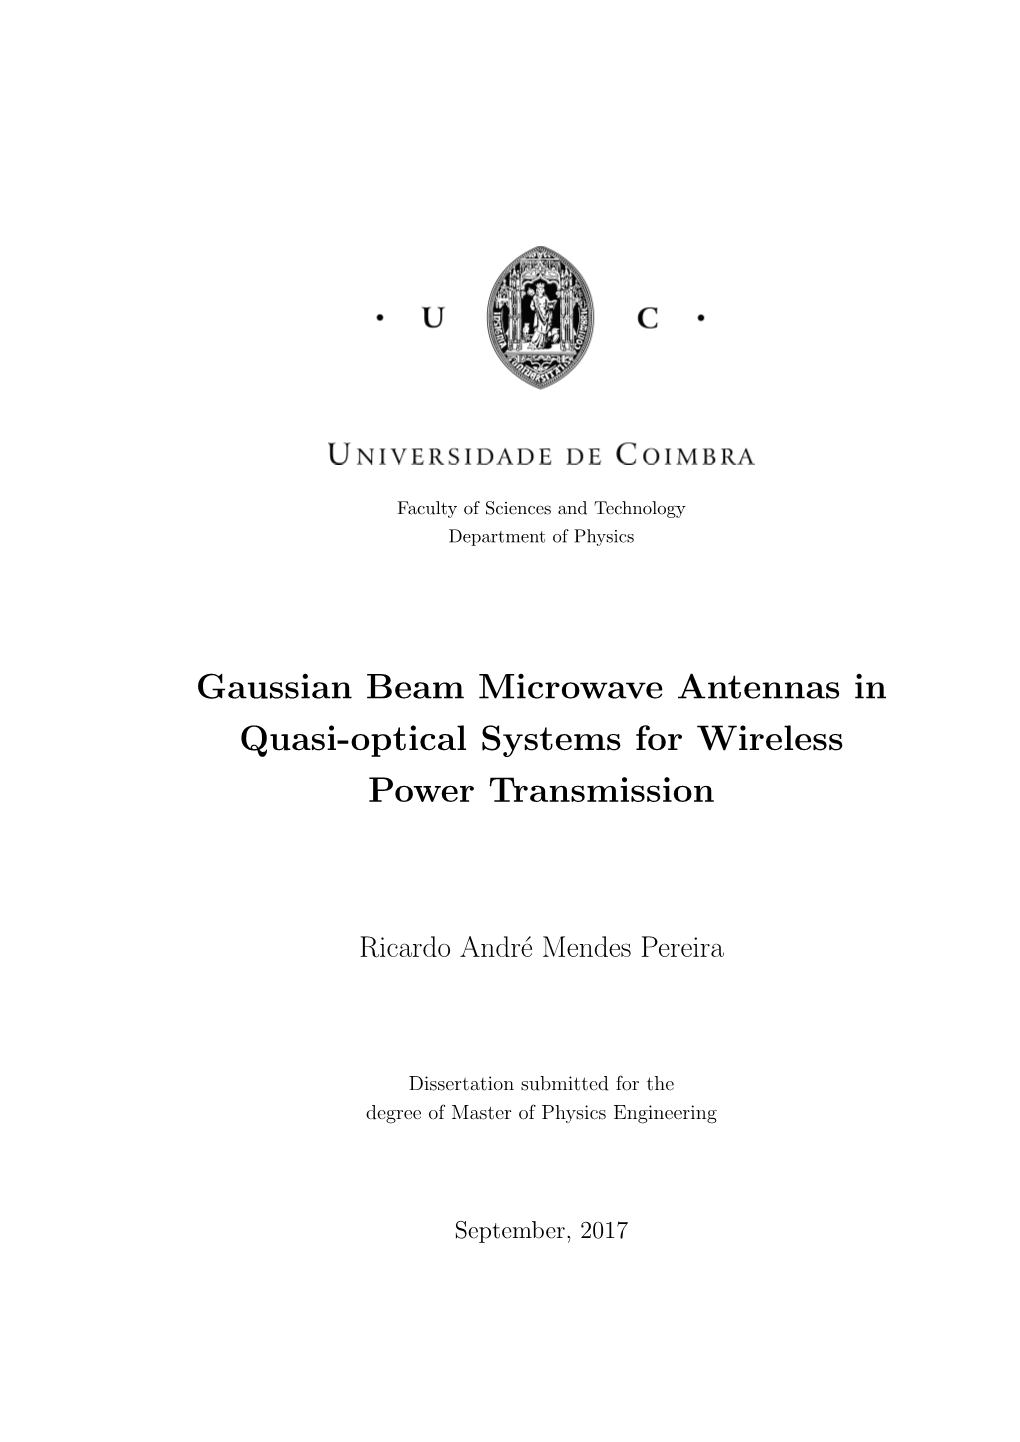 Gaussian Beam Microwave Antennas in Quasi-Optical Systems for Wireless Power Transmission